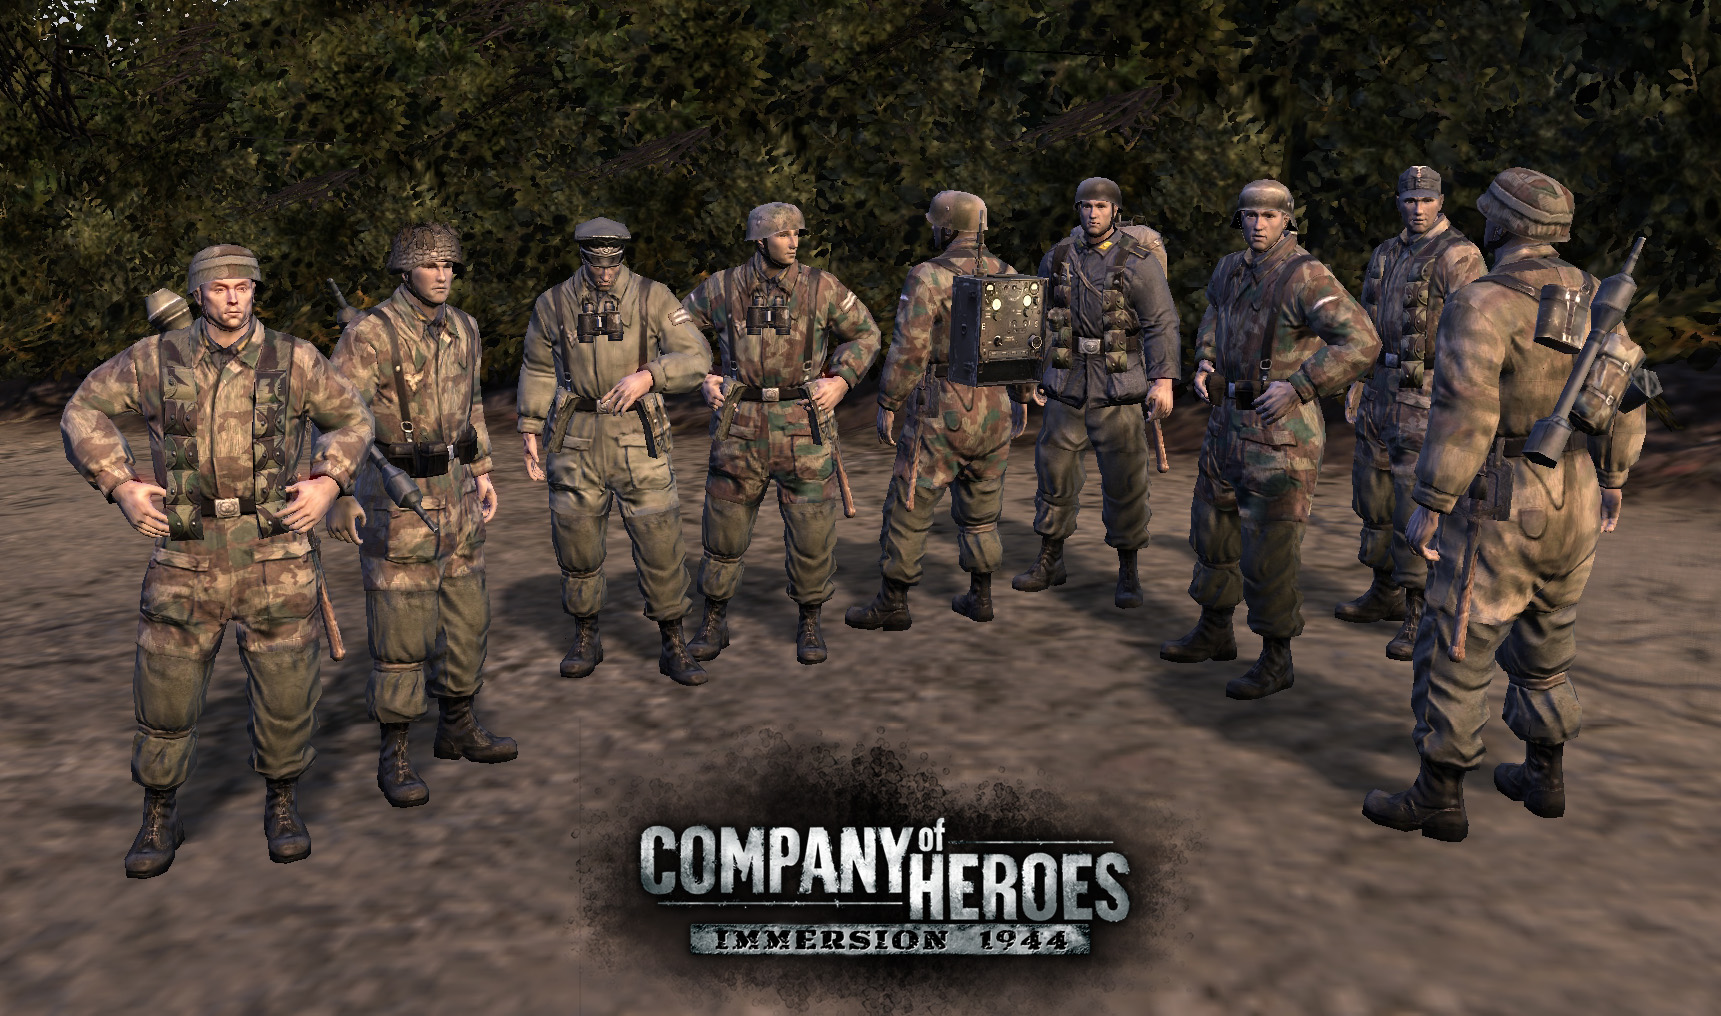 More Fallschirmjaeger image - Company of Heroes: IMMERSION 1944 mod for ...